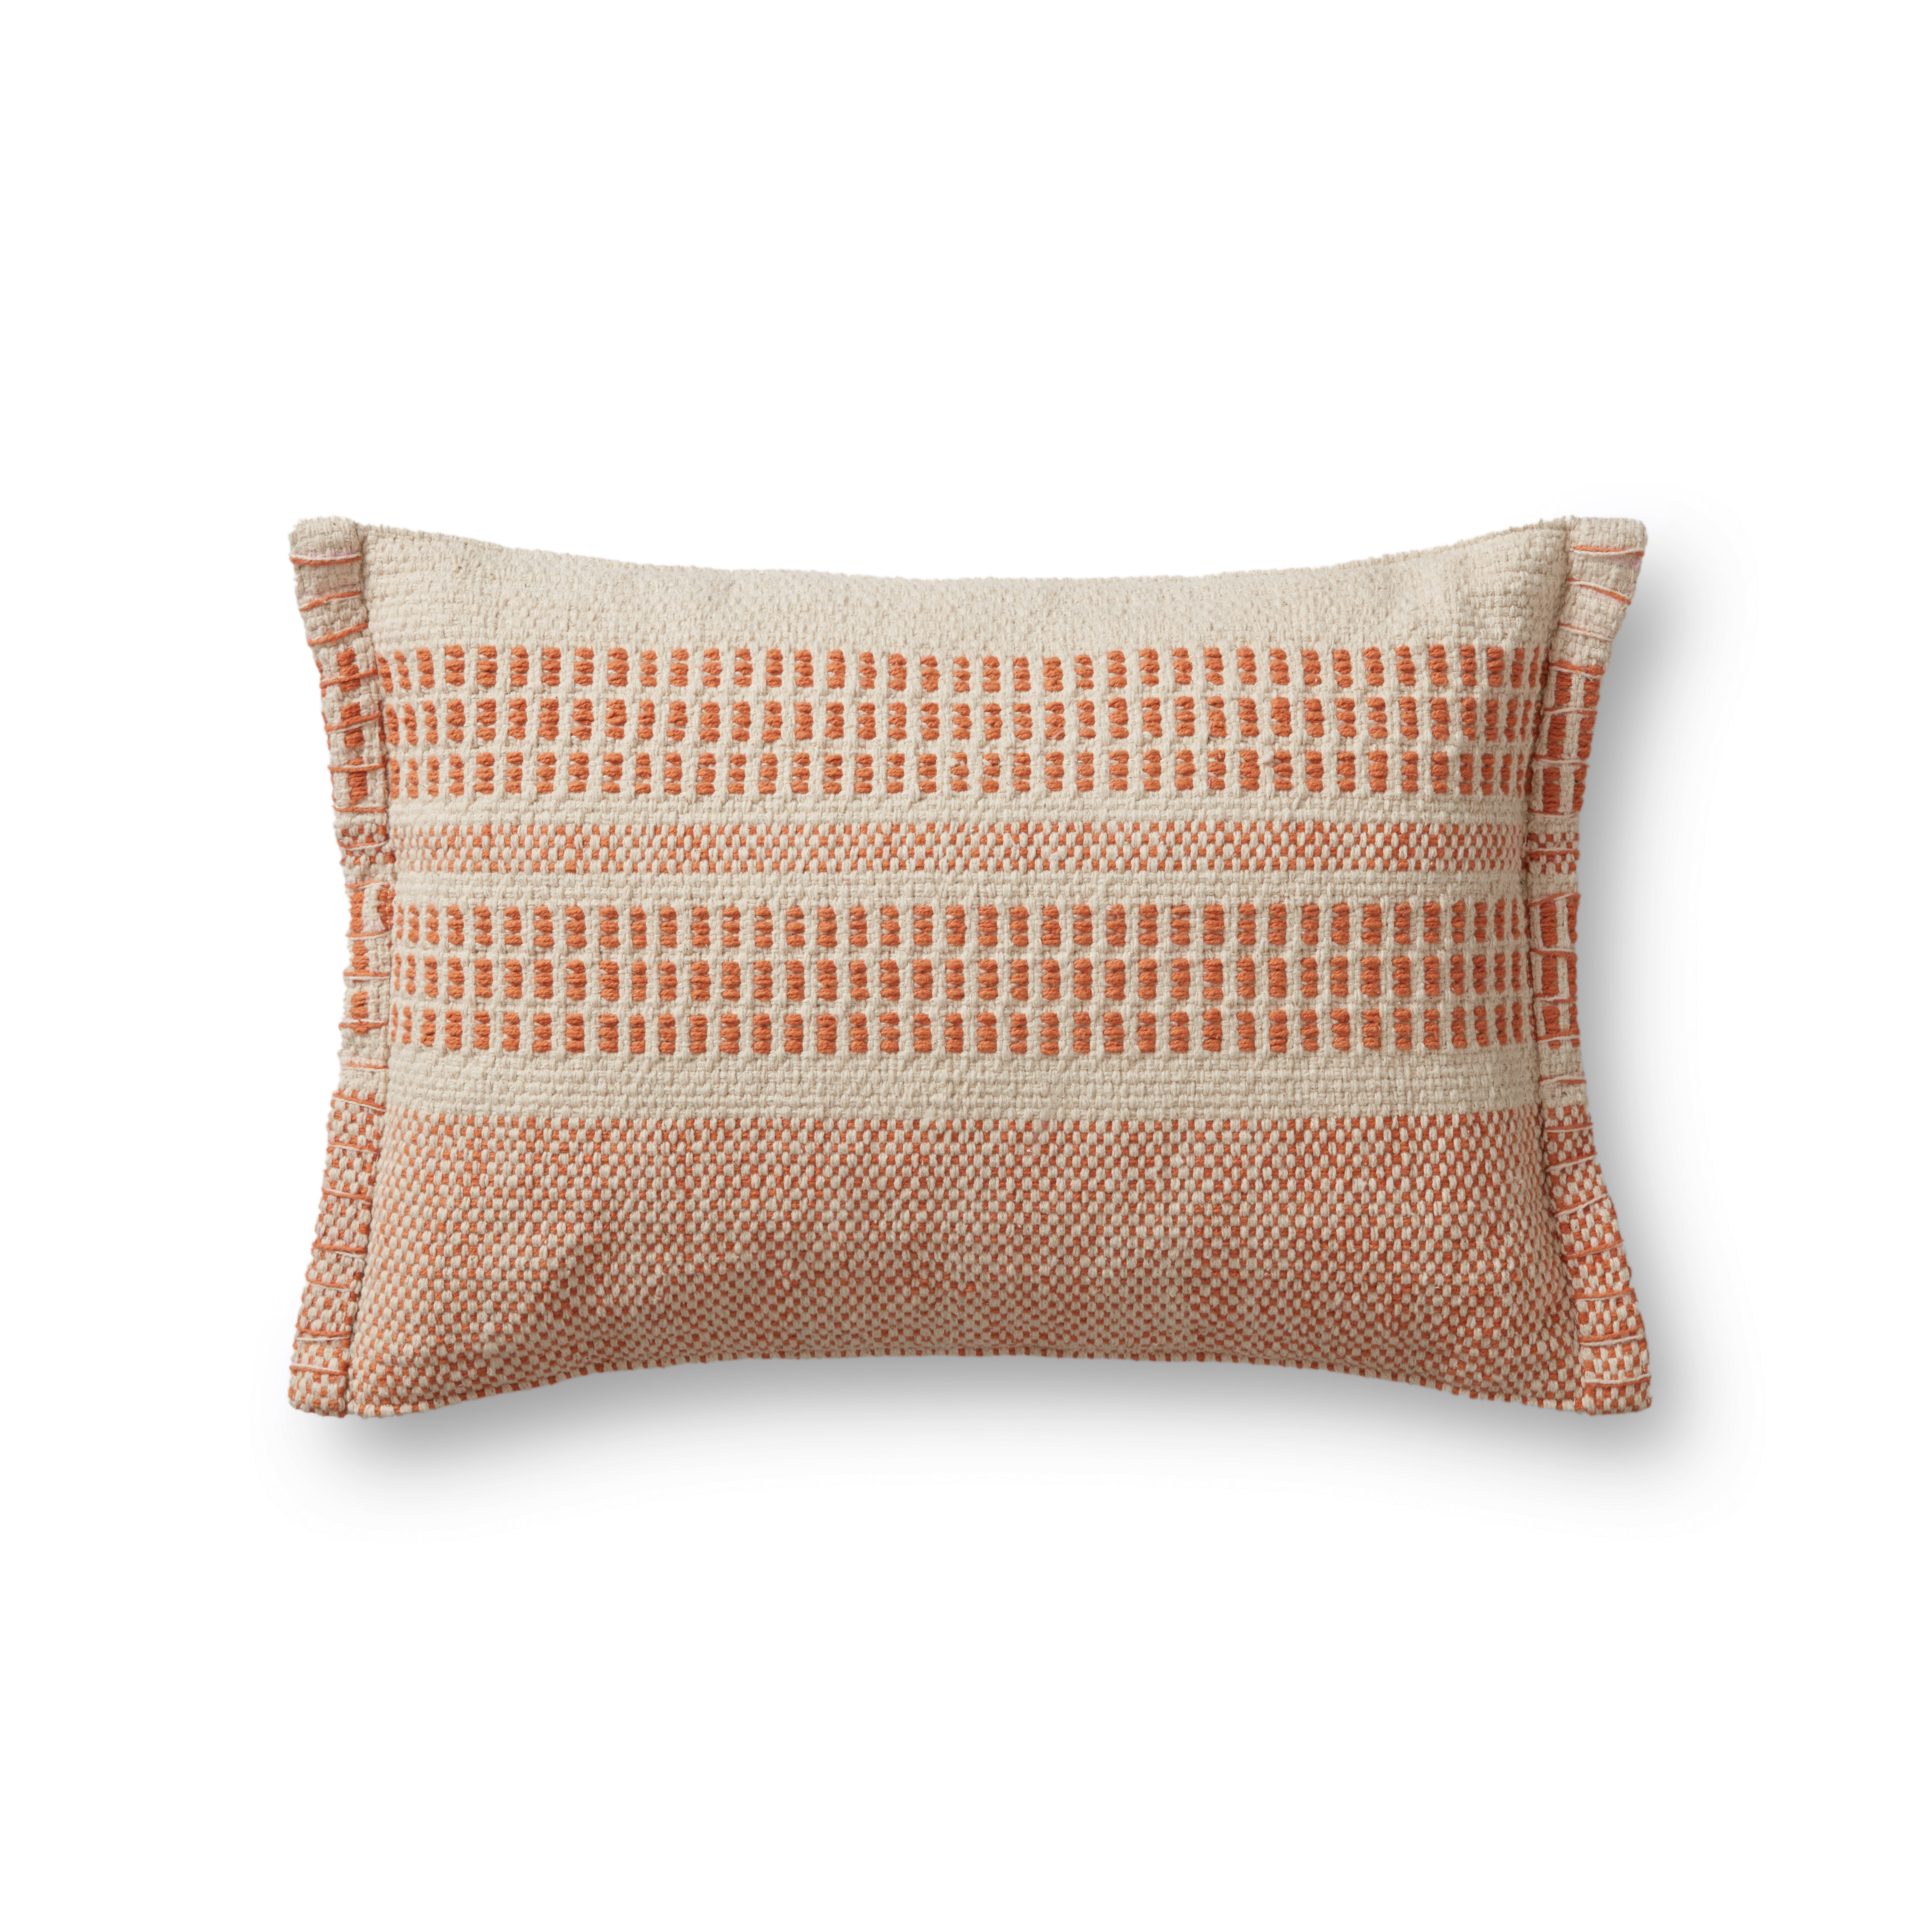 Woven Striped Lumbar Throw Pillow, Rust, 21" x 13" - Magnolia Home by Joana Gaines Crafted by Loloi Rugs